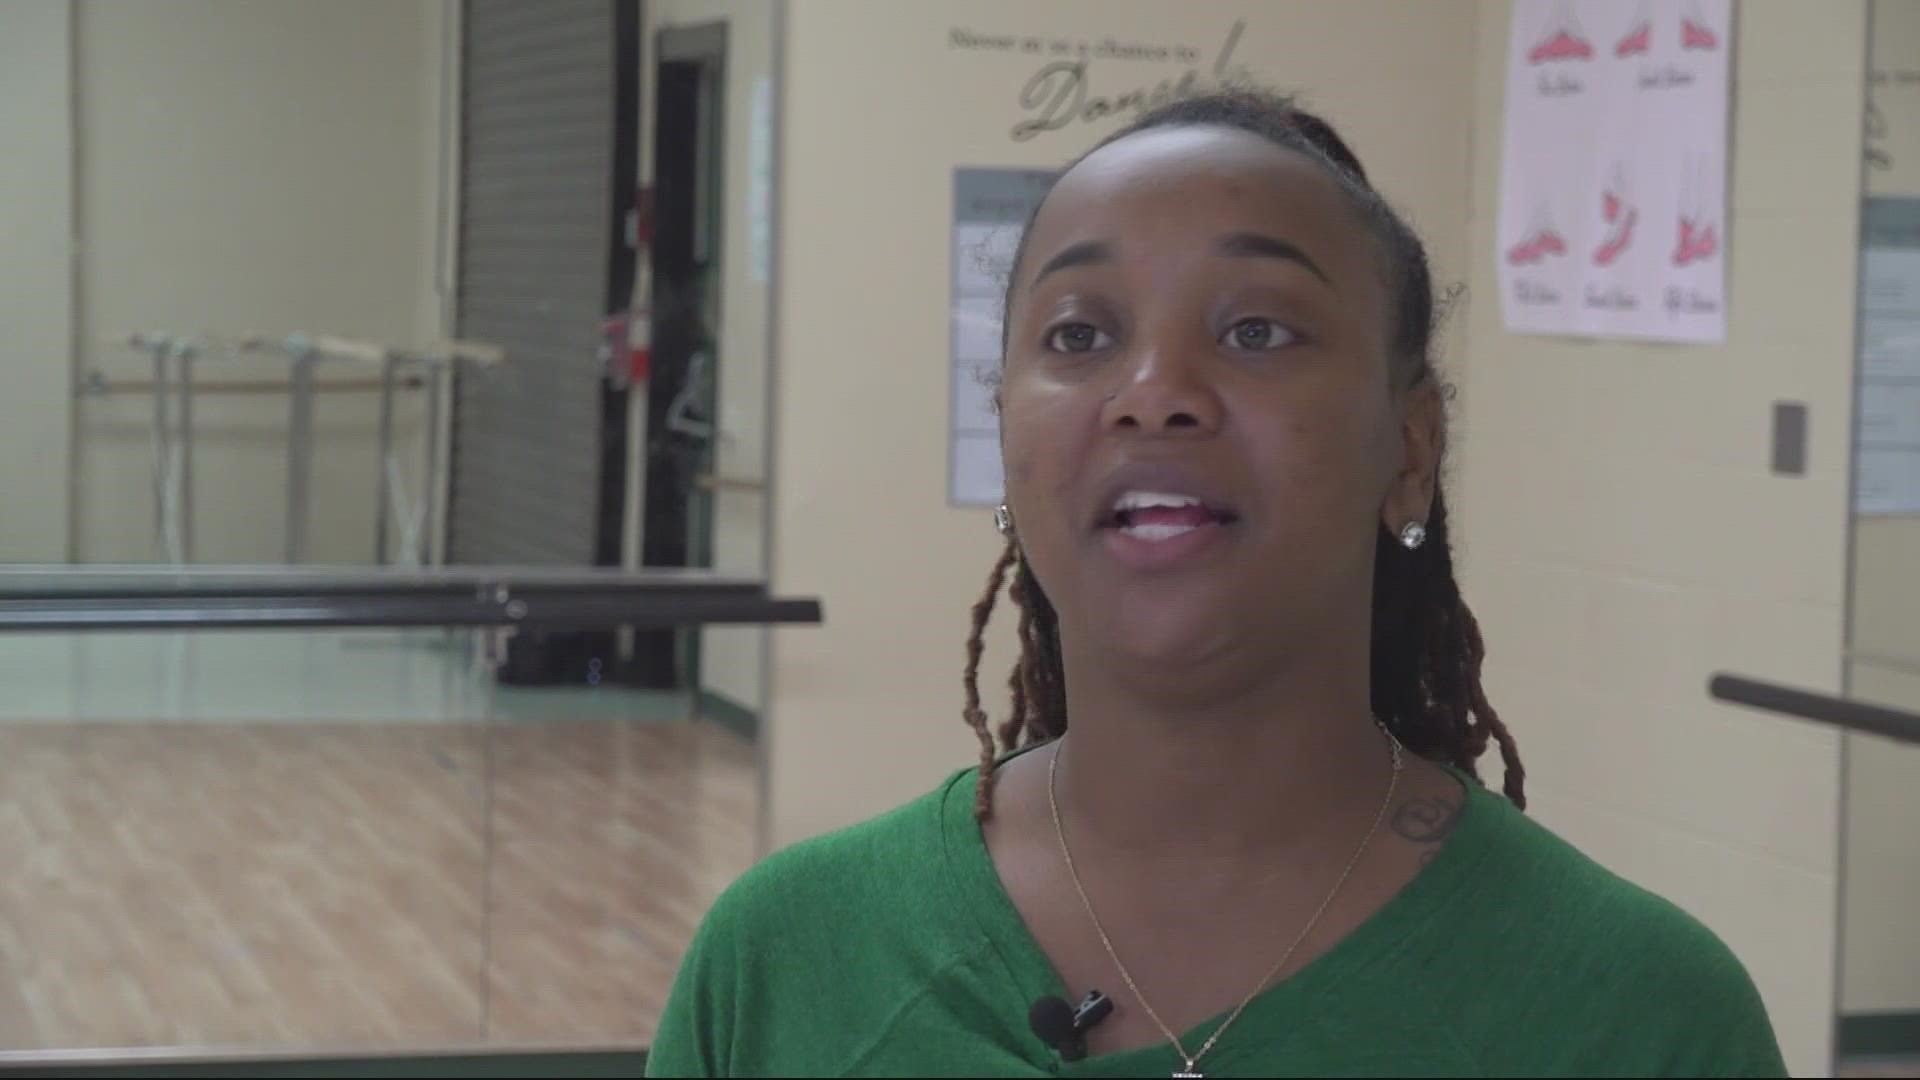 Ms. Williams is a dance teacher at Ed White High. Her students say she helps them improve technique.